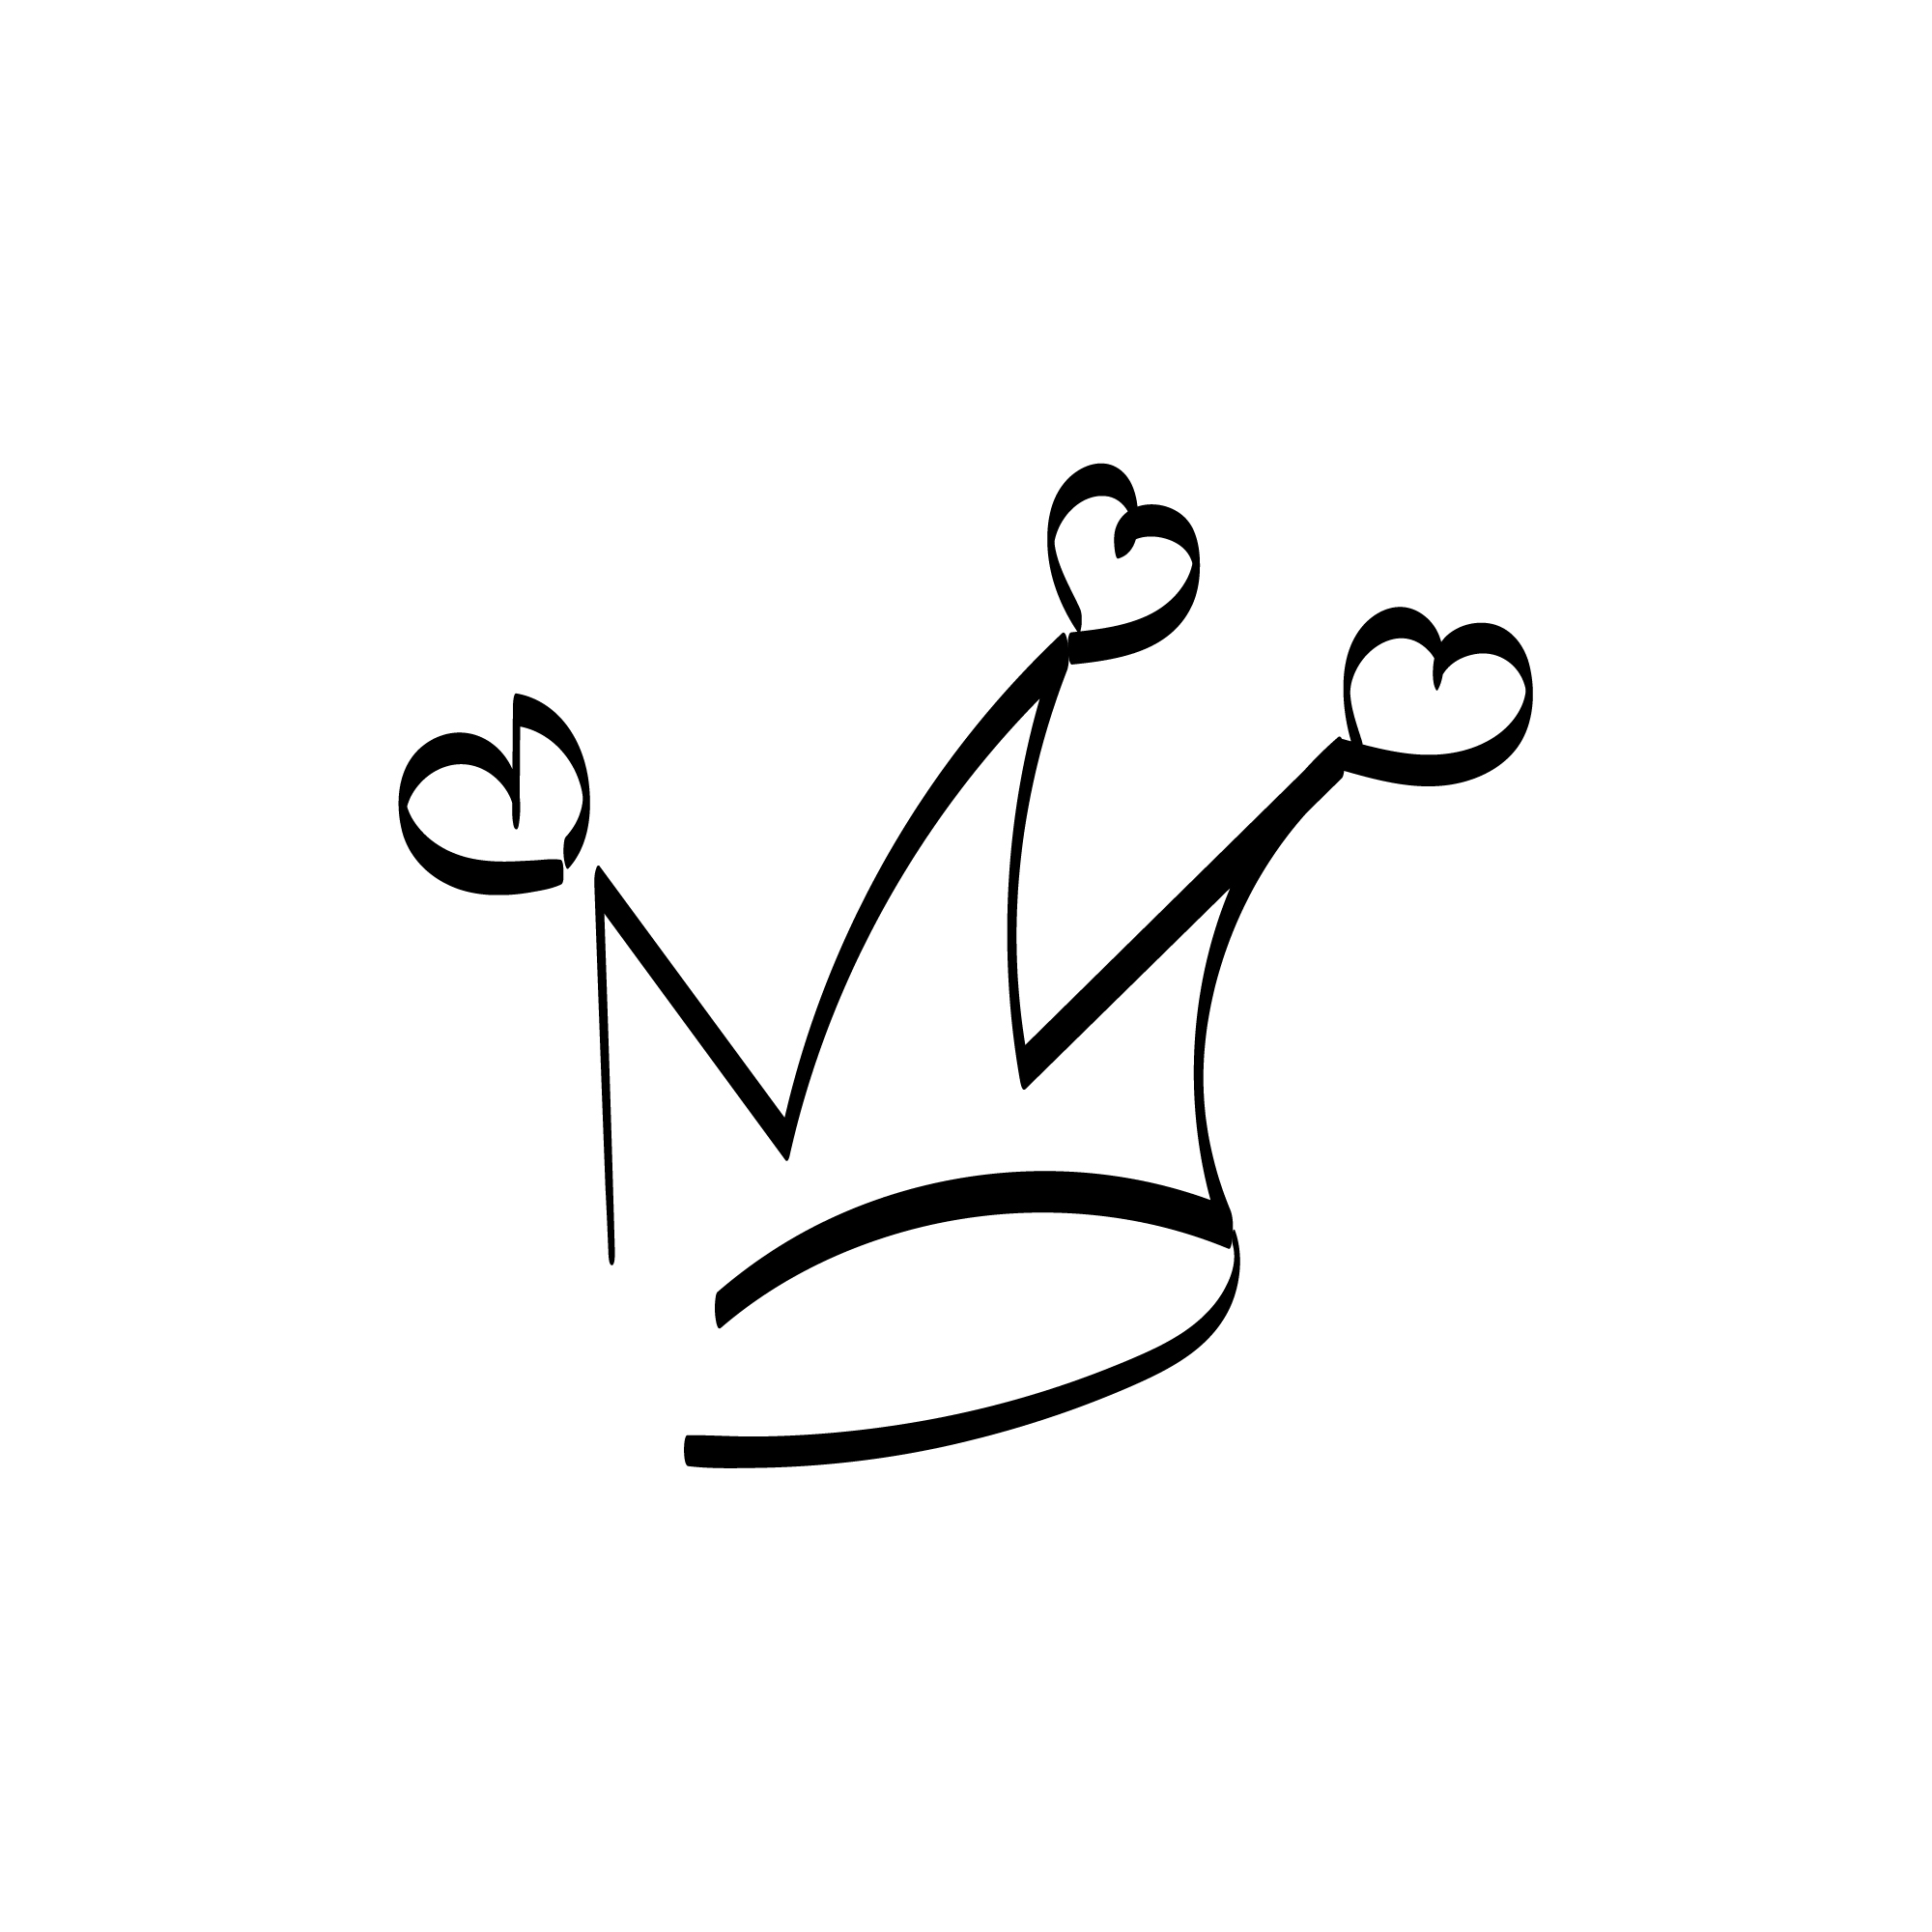 11 Hand Drawn Doodle Crowns.